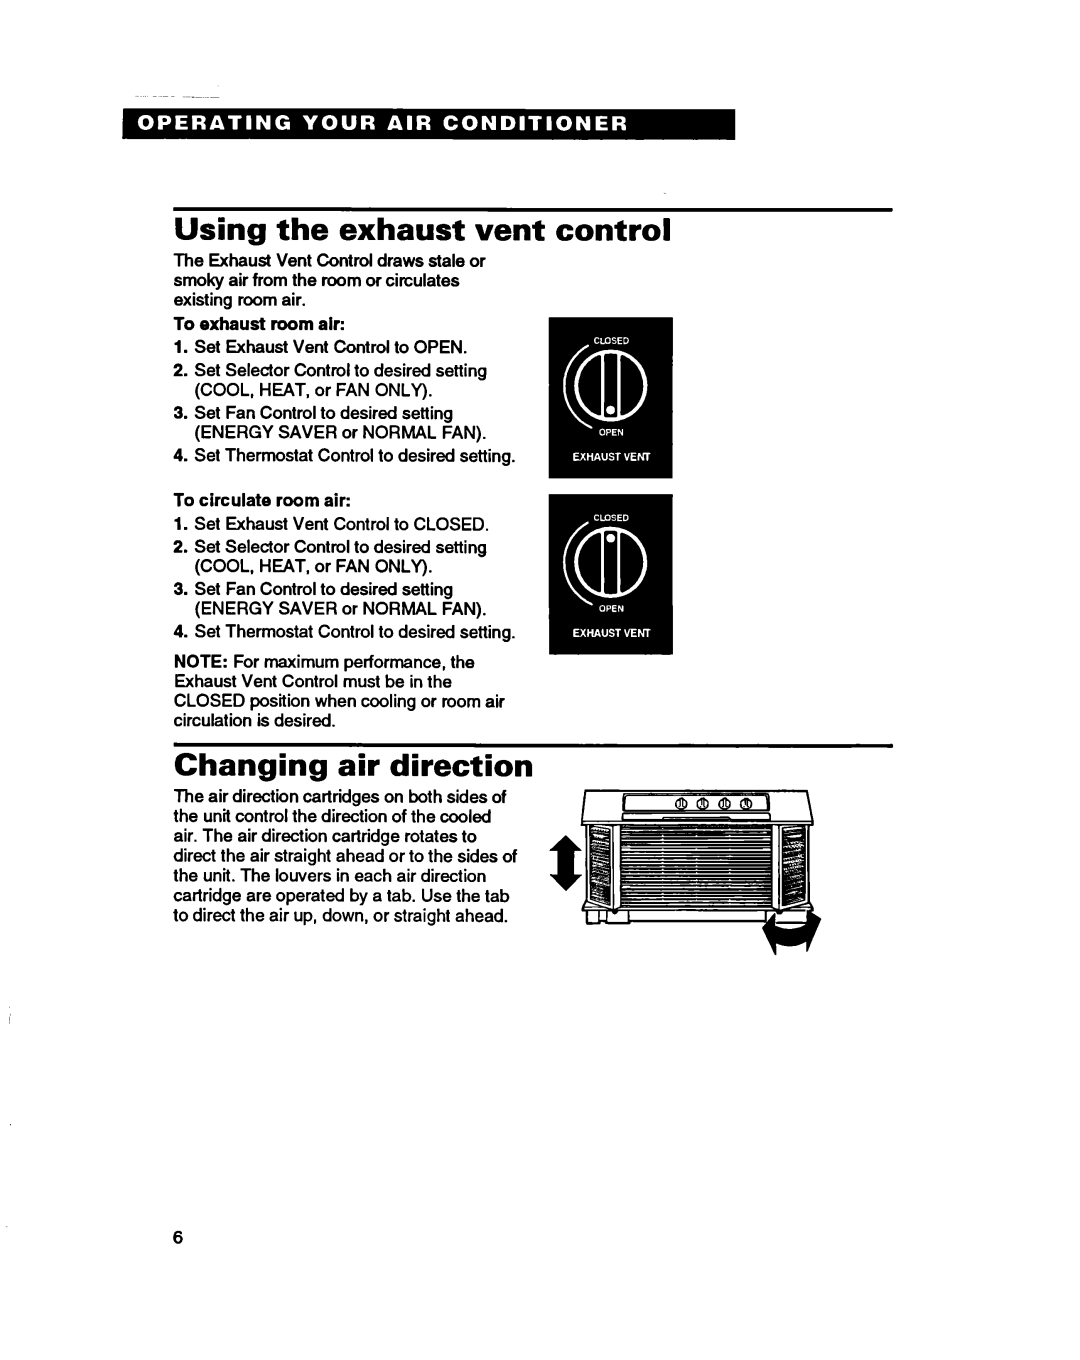 Whirlpool ACH082XD0 Using the exhaust vent control, Changing air directiol, To exhaust room alr, To circulate room air 